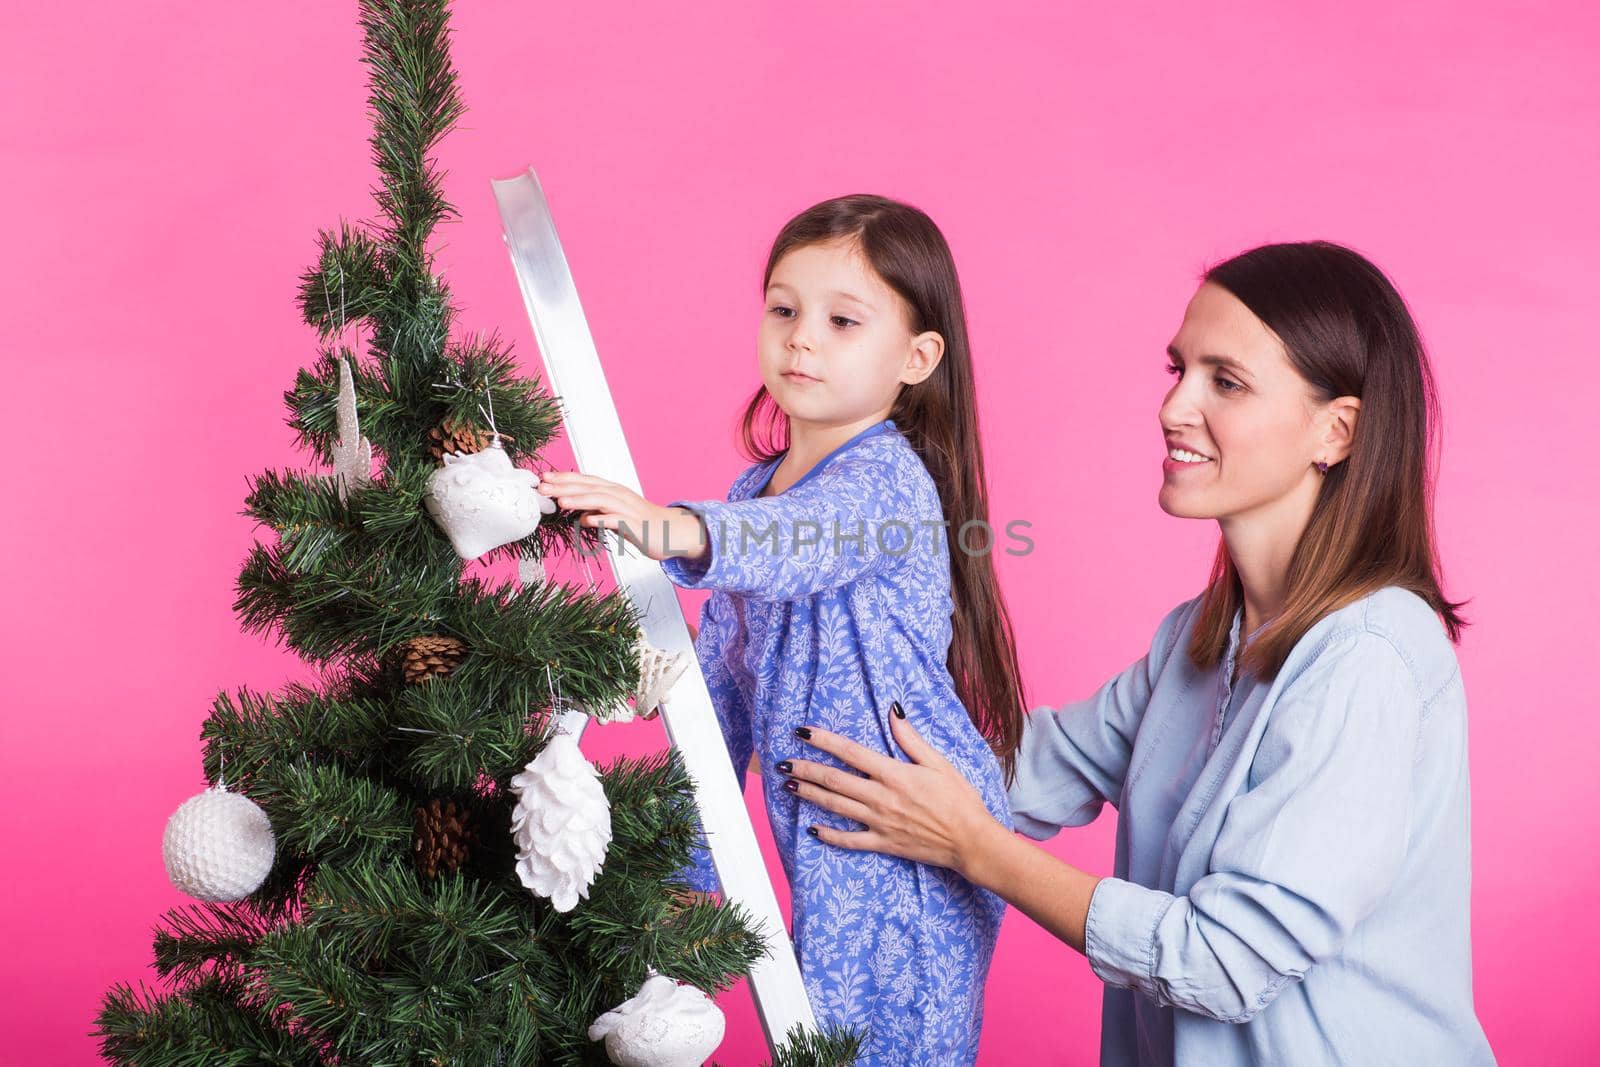 Holidays, family and christmas concept - mother and daughter decorating christmas tree on pink background